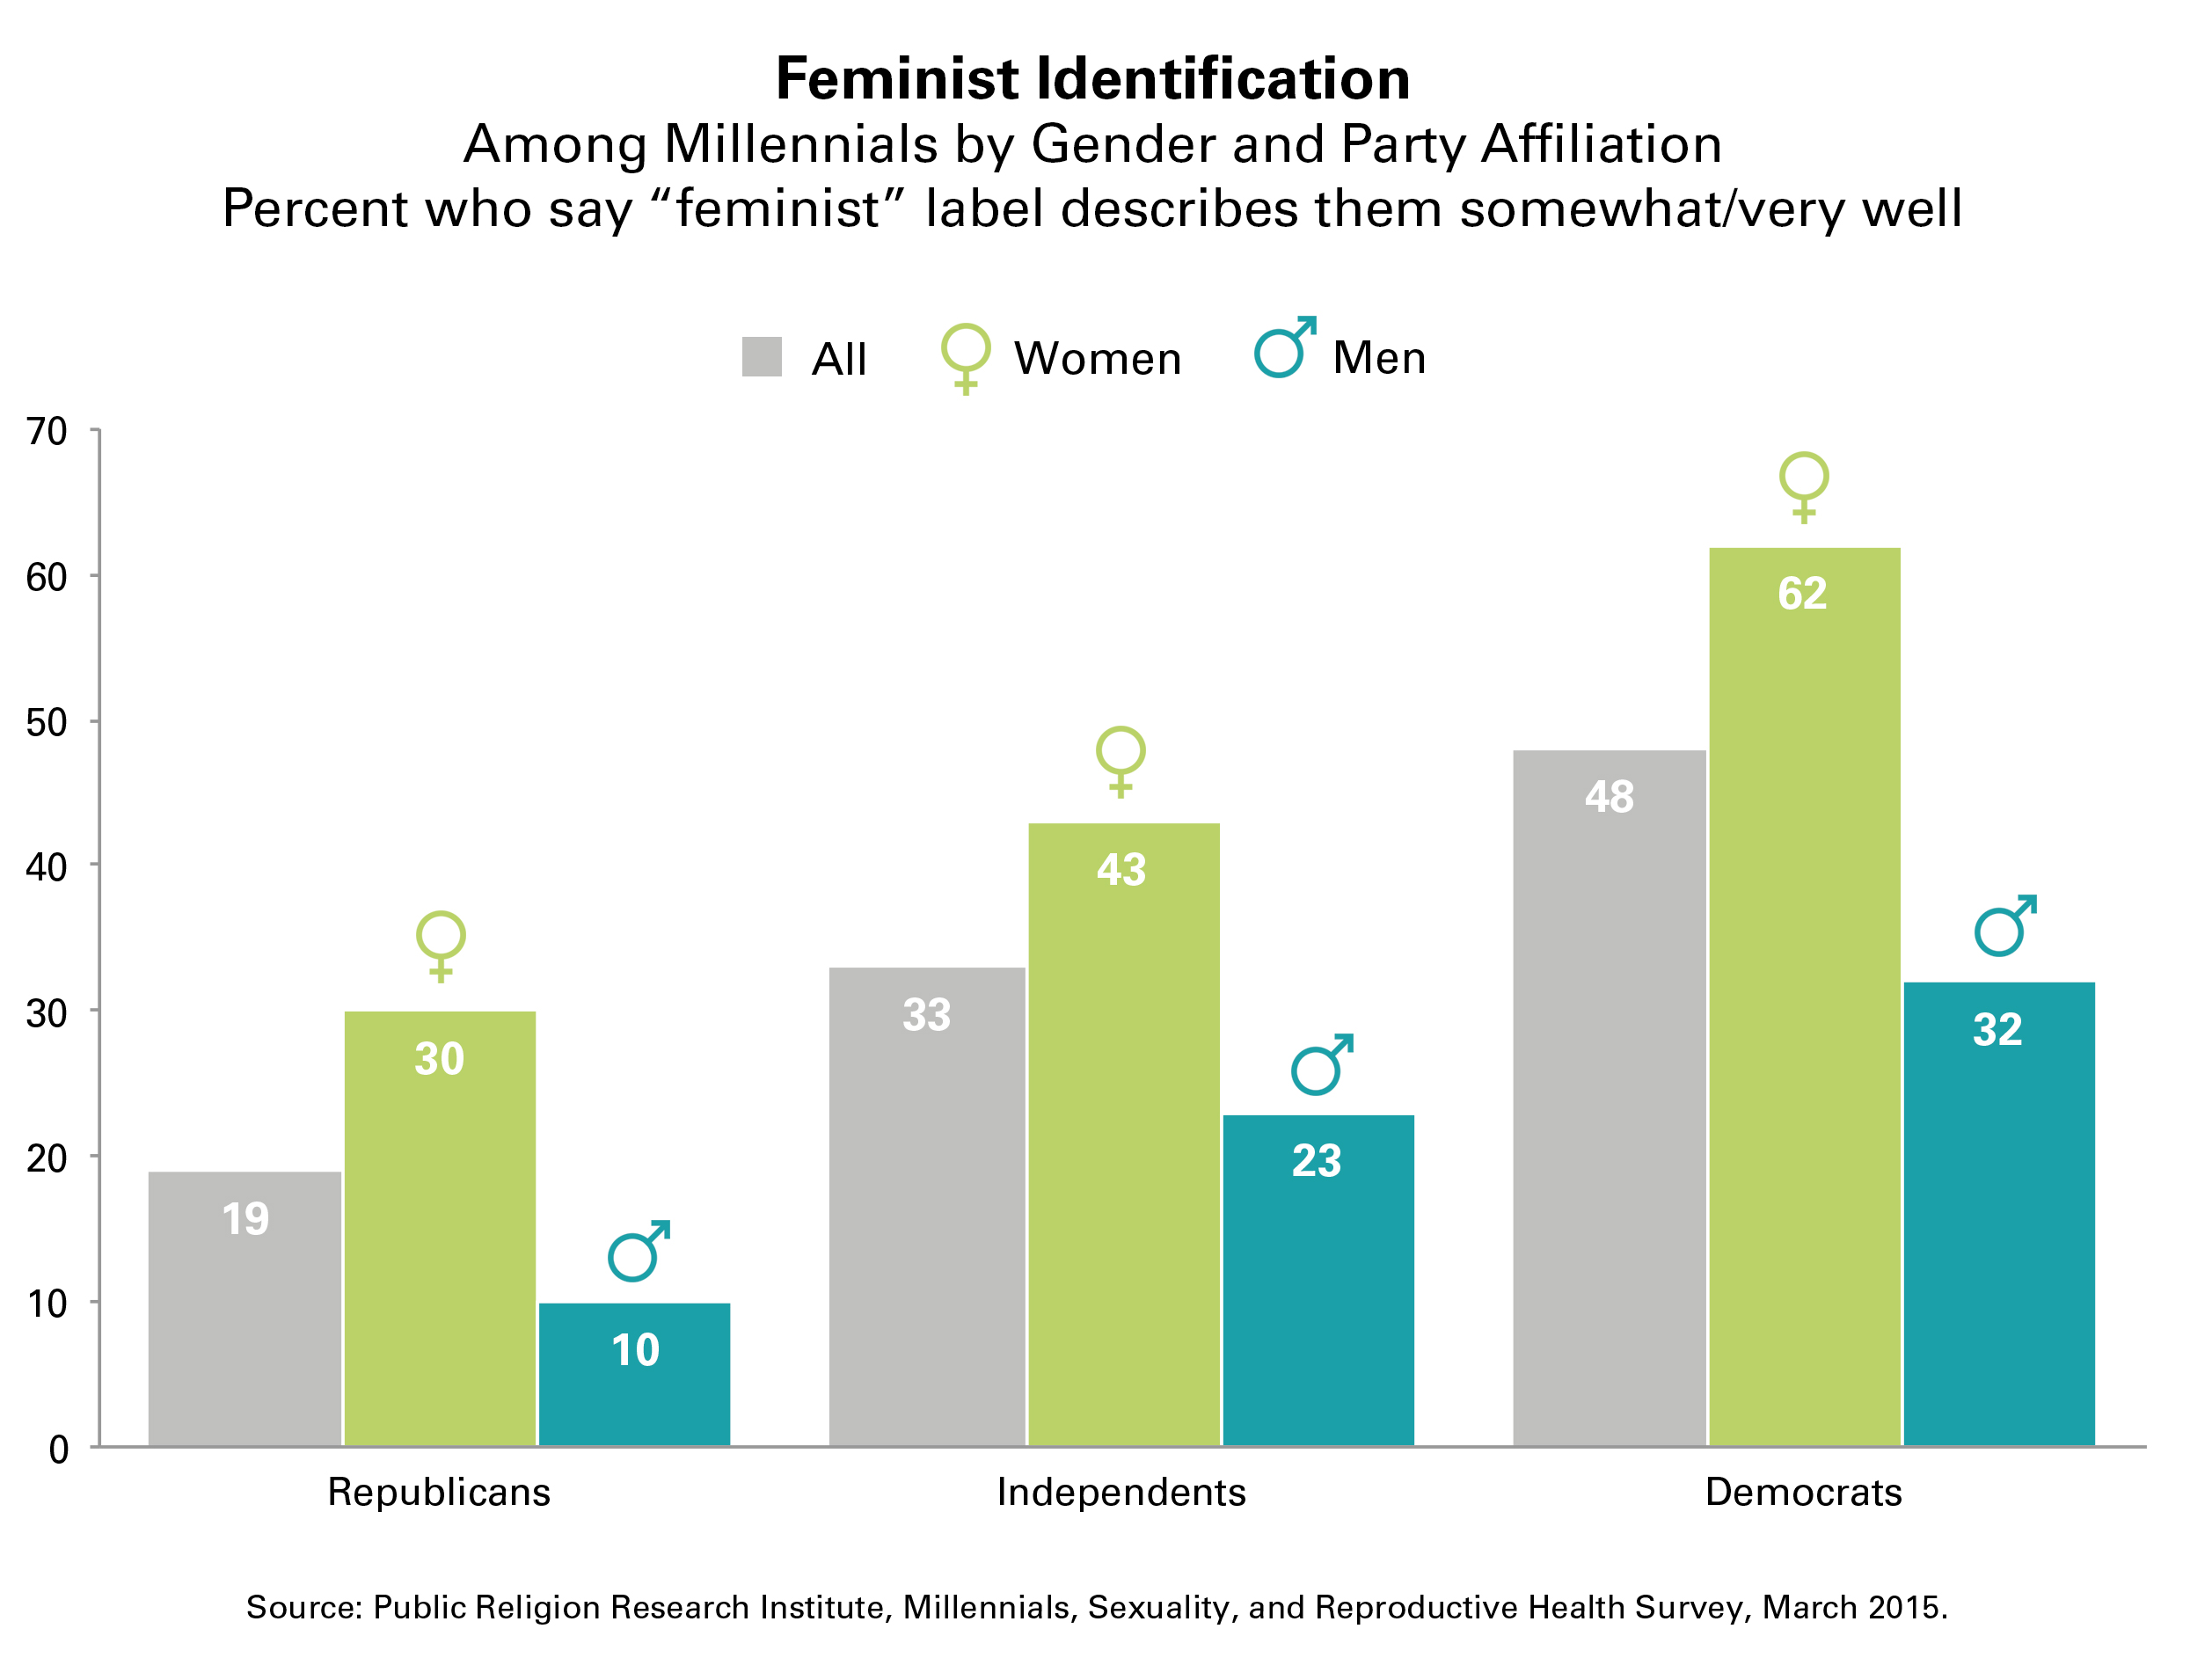 Millennials and Gen Z less in favour of gender equality than older